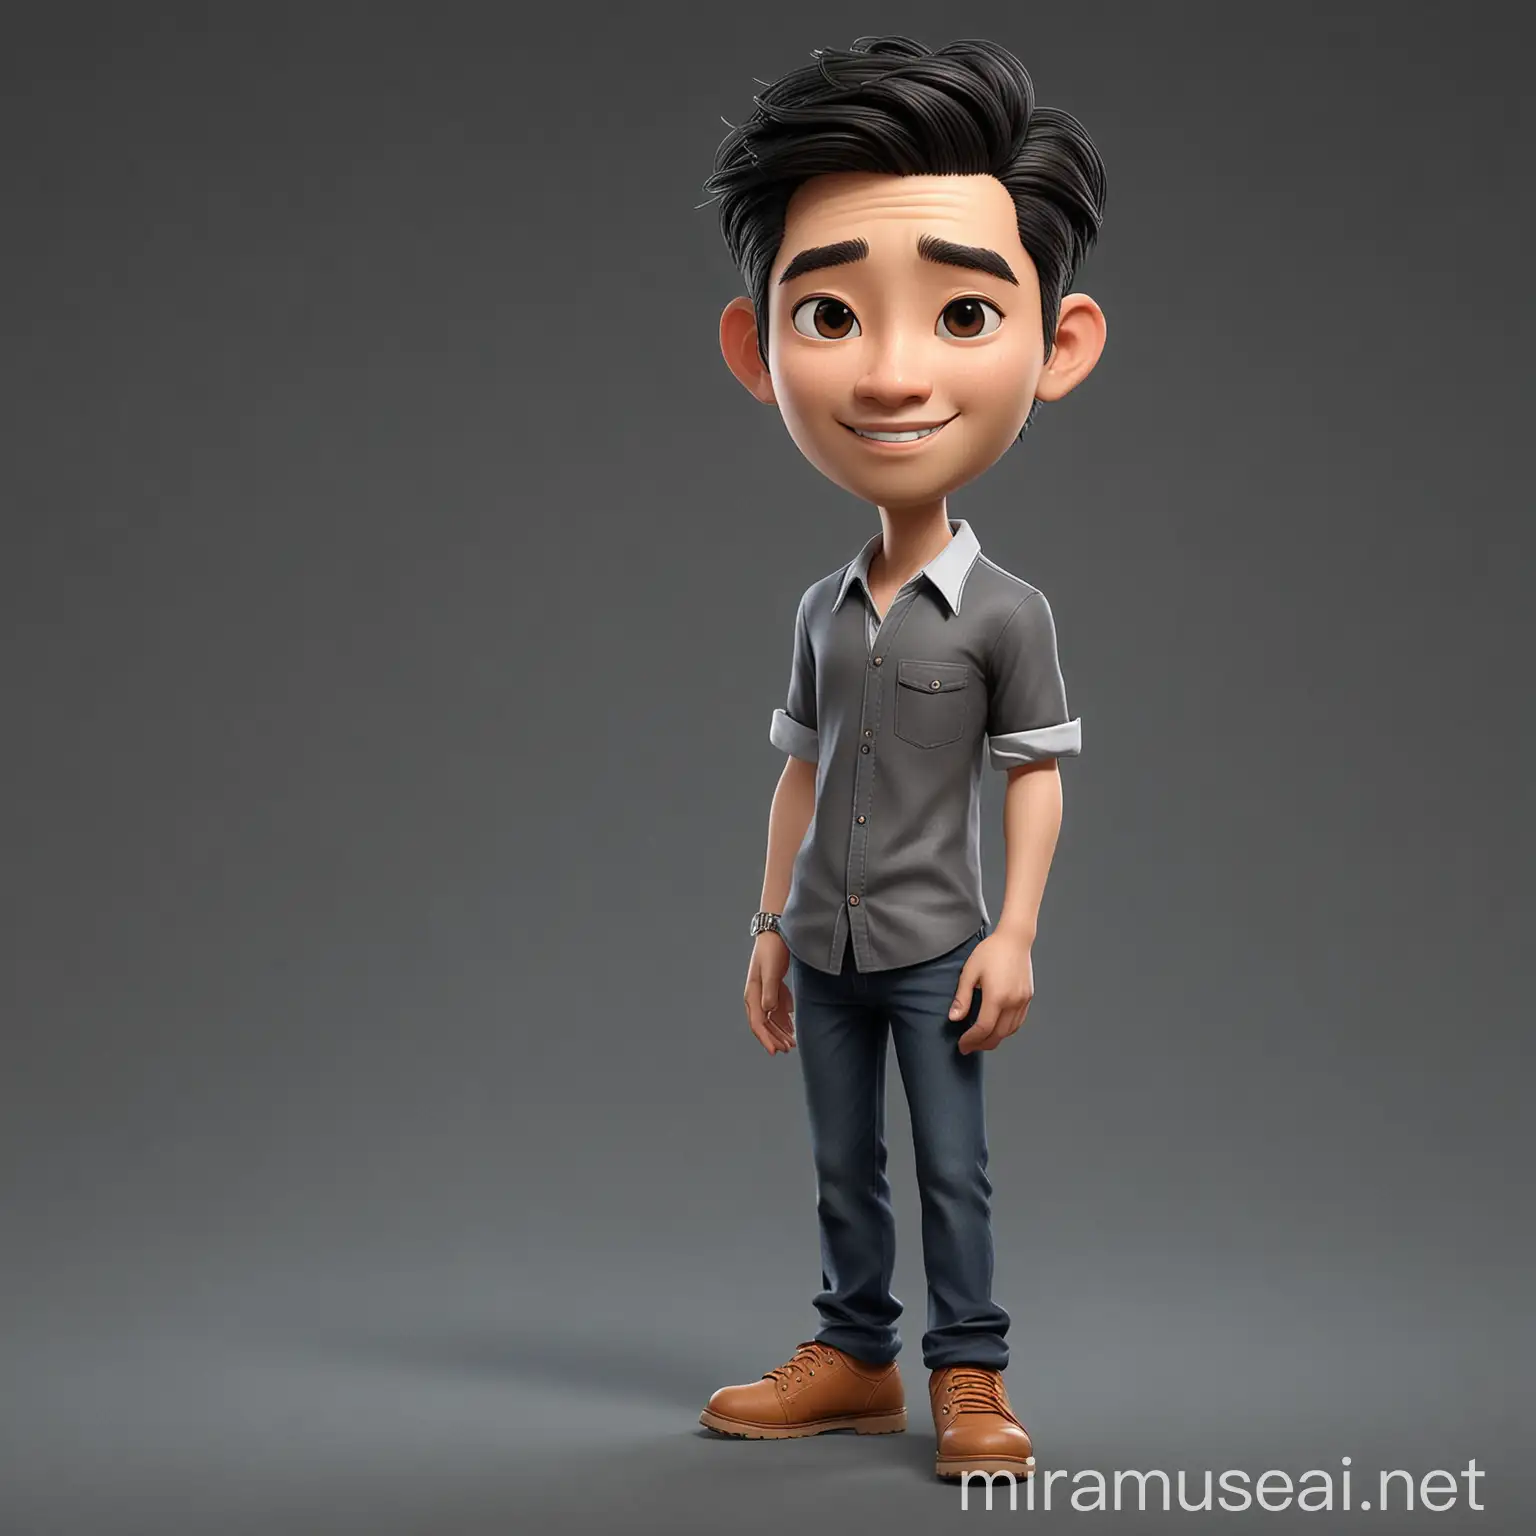 Asian Man Cartoon Character with Middle Part Hair and Black Shirt in Studio Setting